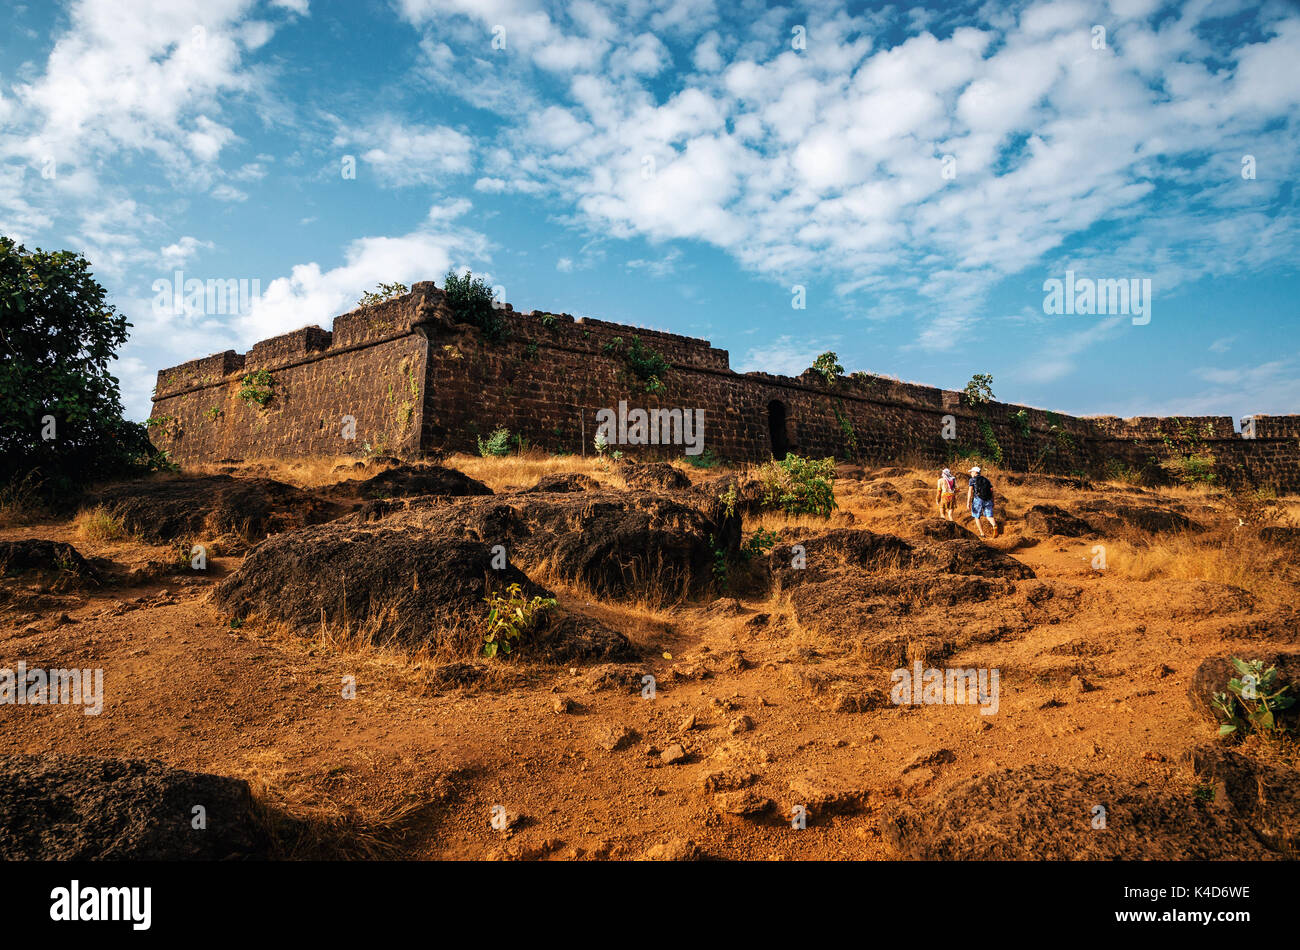 Tourists go to the ruins of Chapora fort, located near Vagator village, North Goa, India Stock Photo